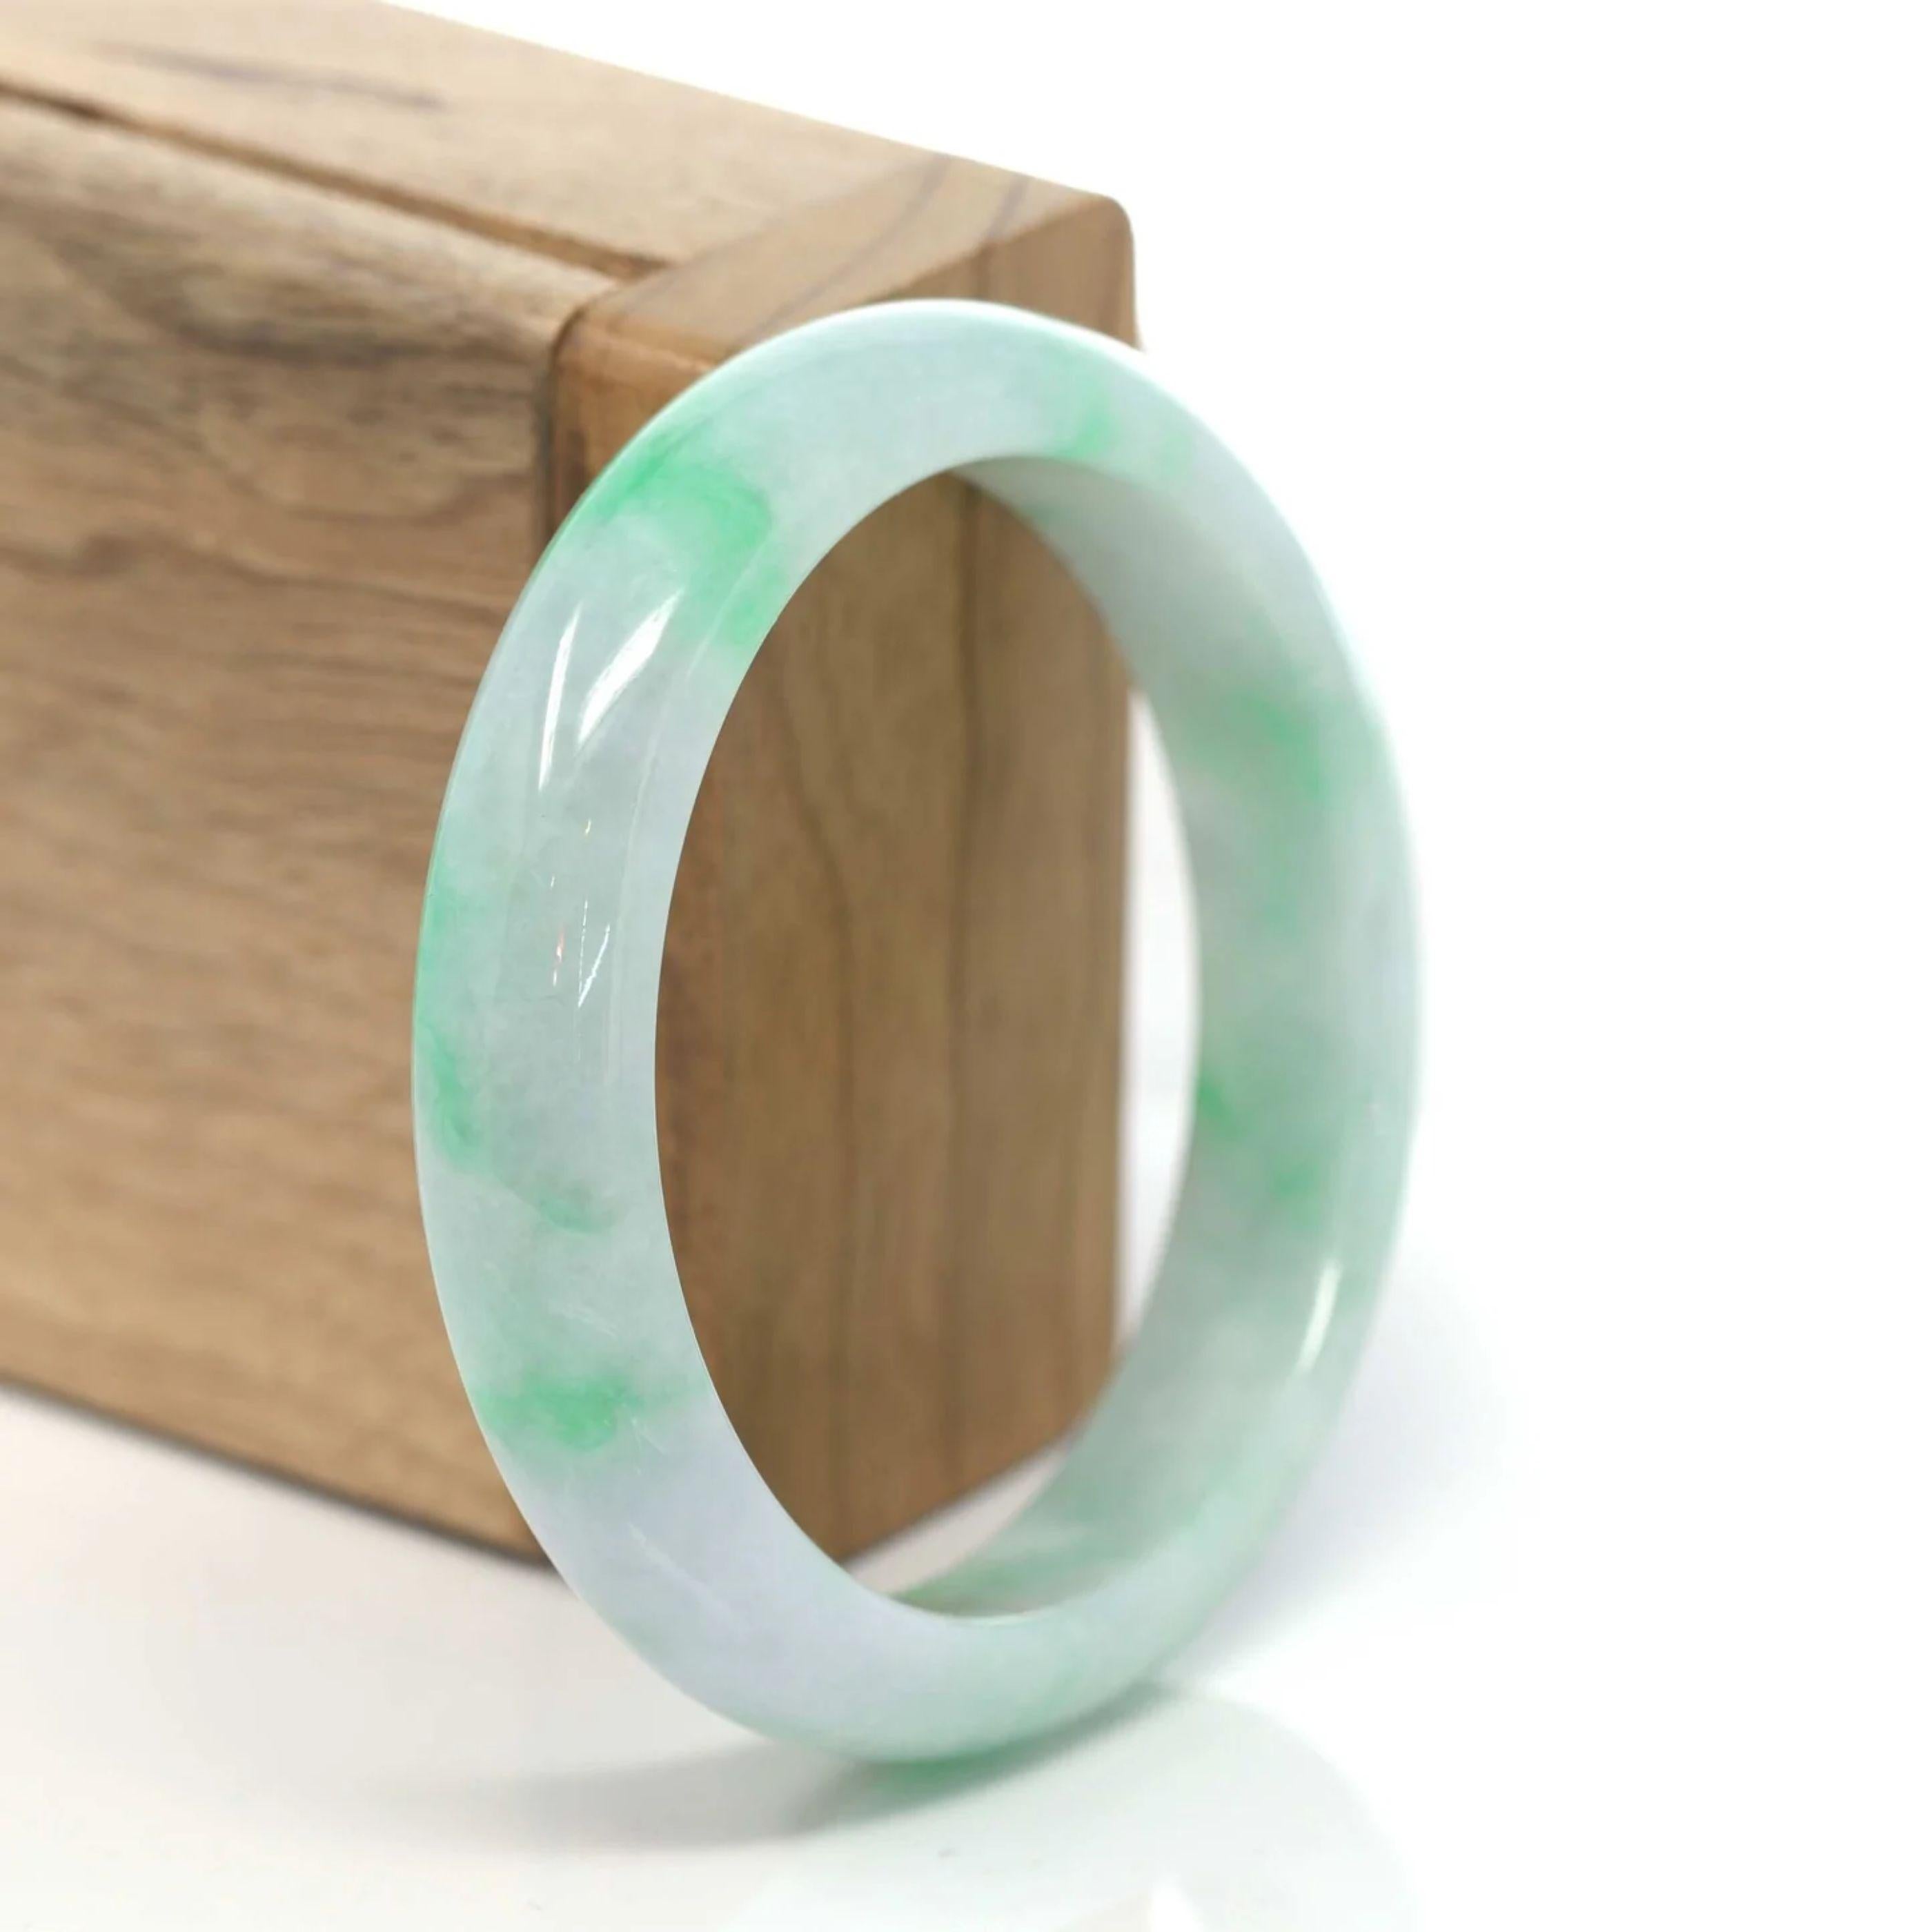  * DETAILS--- Natural Light Green Genuine Burmese Jadeite Jade Bangle Bracelet.  All RealJade Co.® Jewelry's Jade Bangles are guaranteed to be untreated. The jade texture is relatively fine with some patches of varieties of gorgeous green lavender